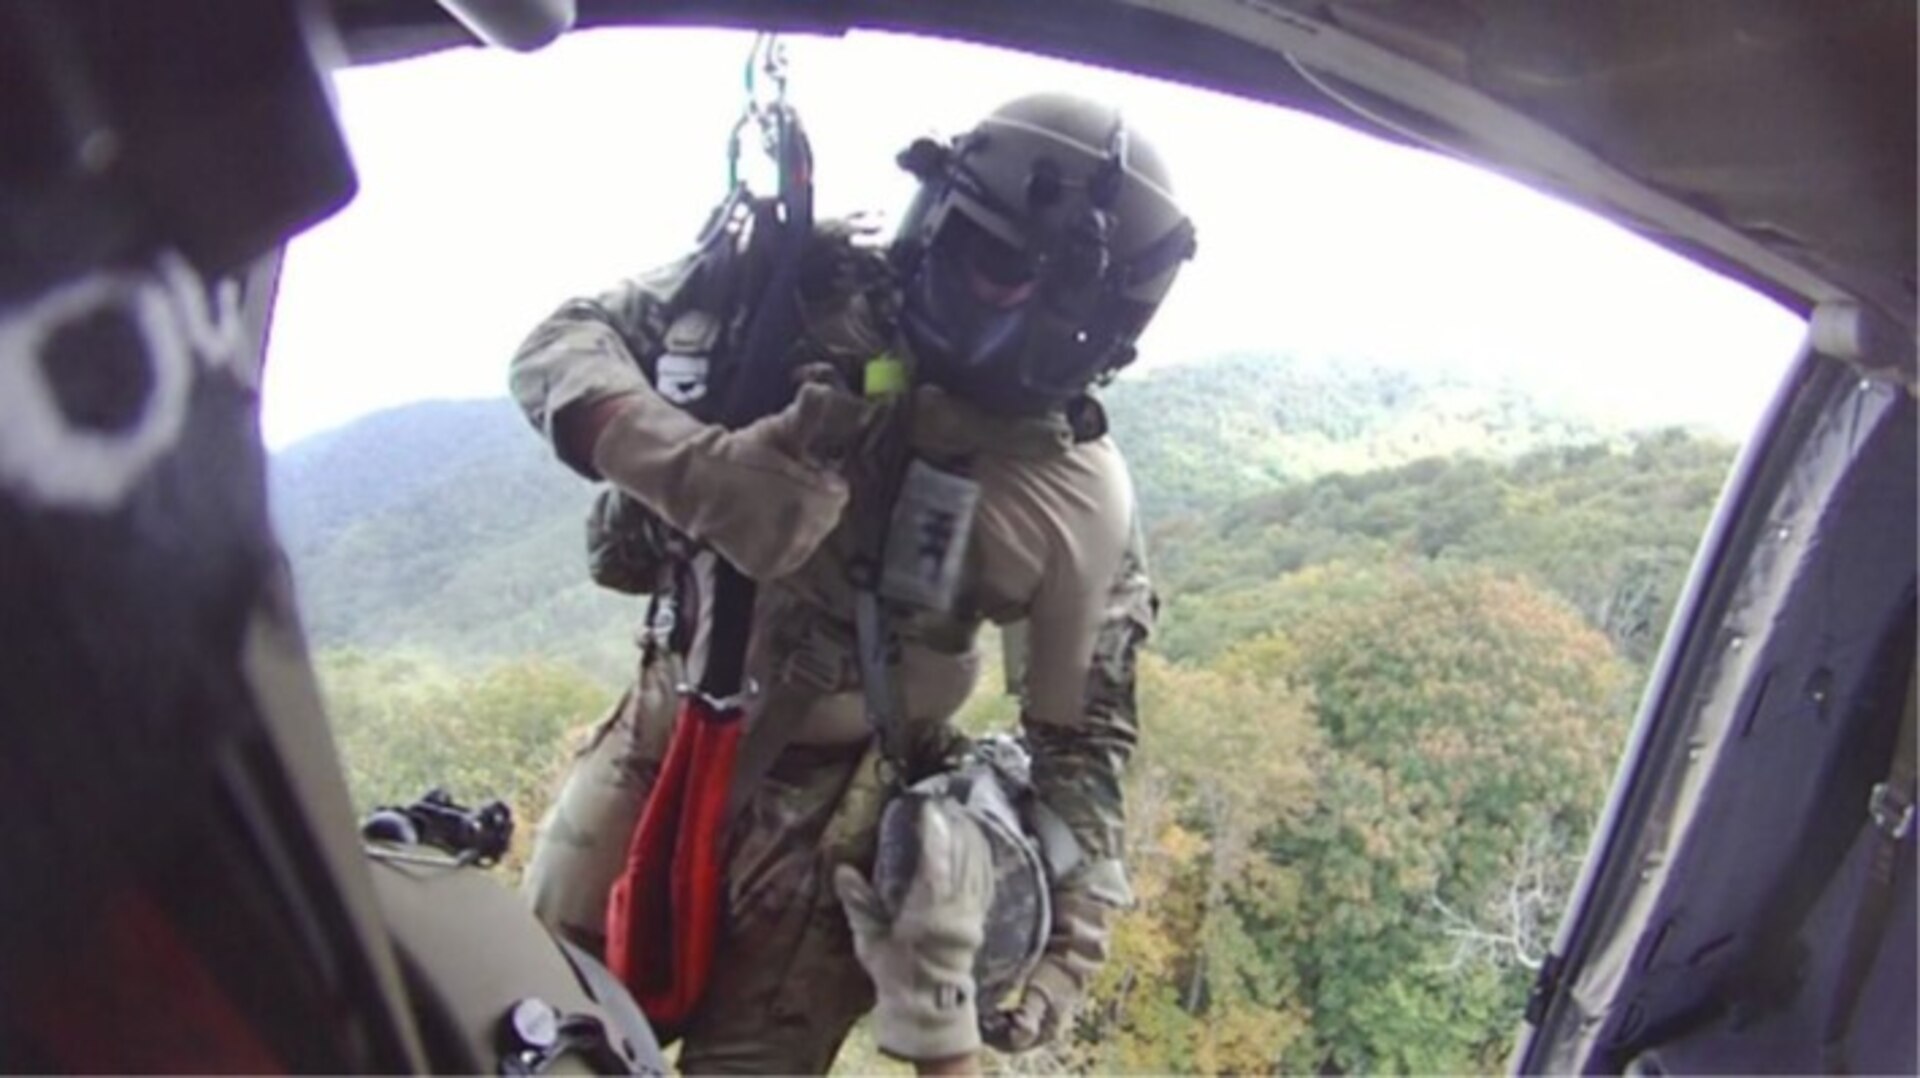 Sgt. 1st Class Giovanni DeZuani, a flight paramedic, is lowered from a UH-60 Black Hawk near Derrick Knob Shelter to rescue a hiker in distress along the Appalachian Trail Sept. 20, 2022. The flight crew from the Tennessee National Guard conducted the emergency air evacuation mission after a hiker reported chest pains.